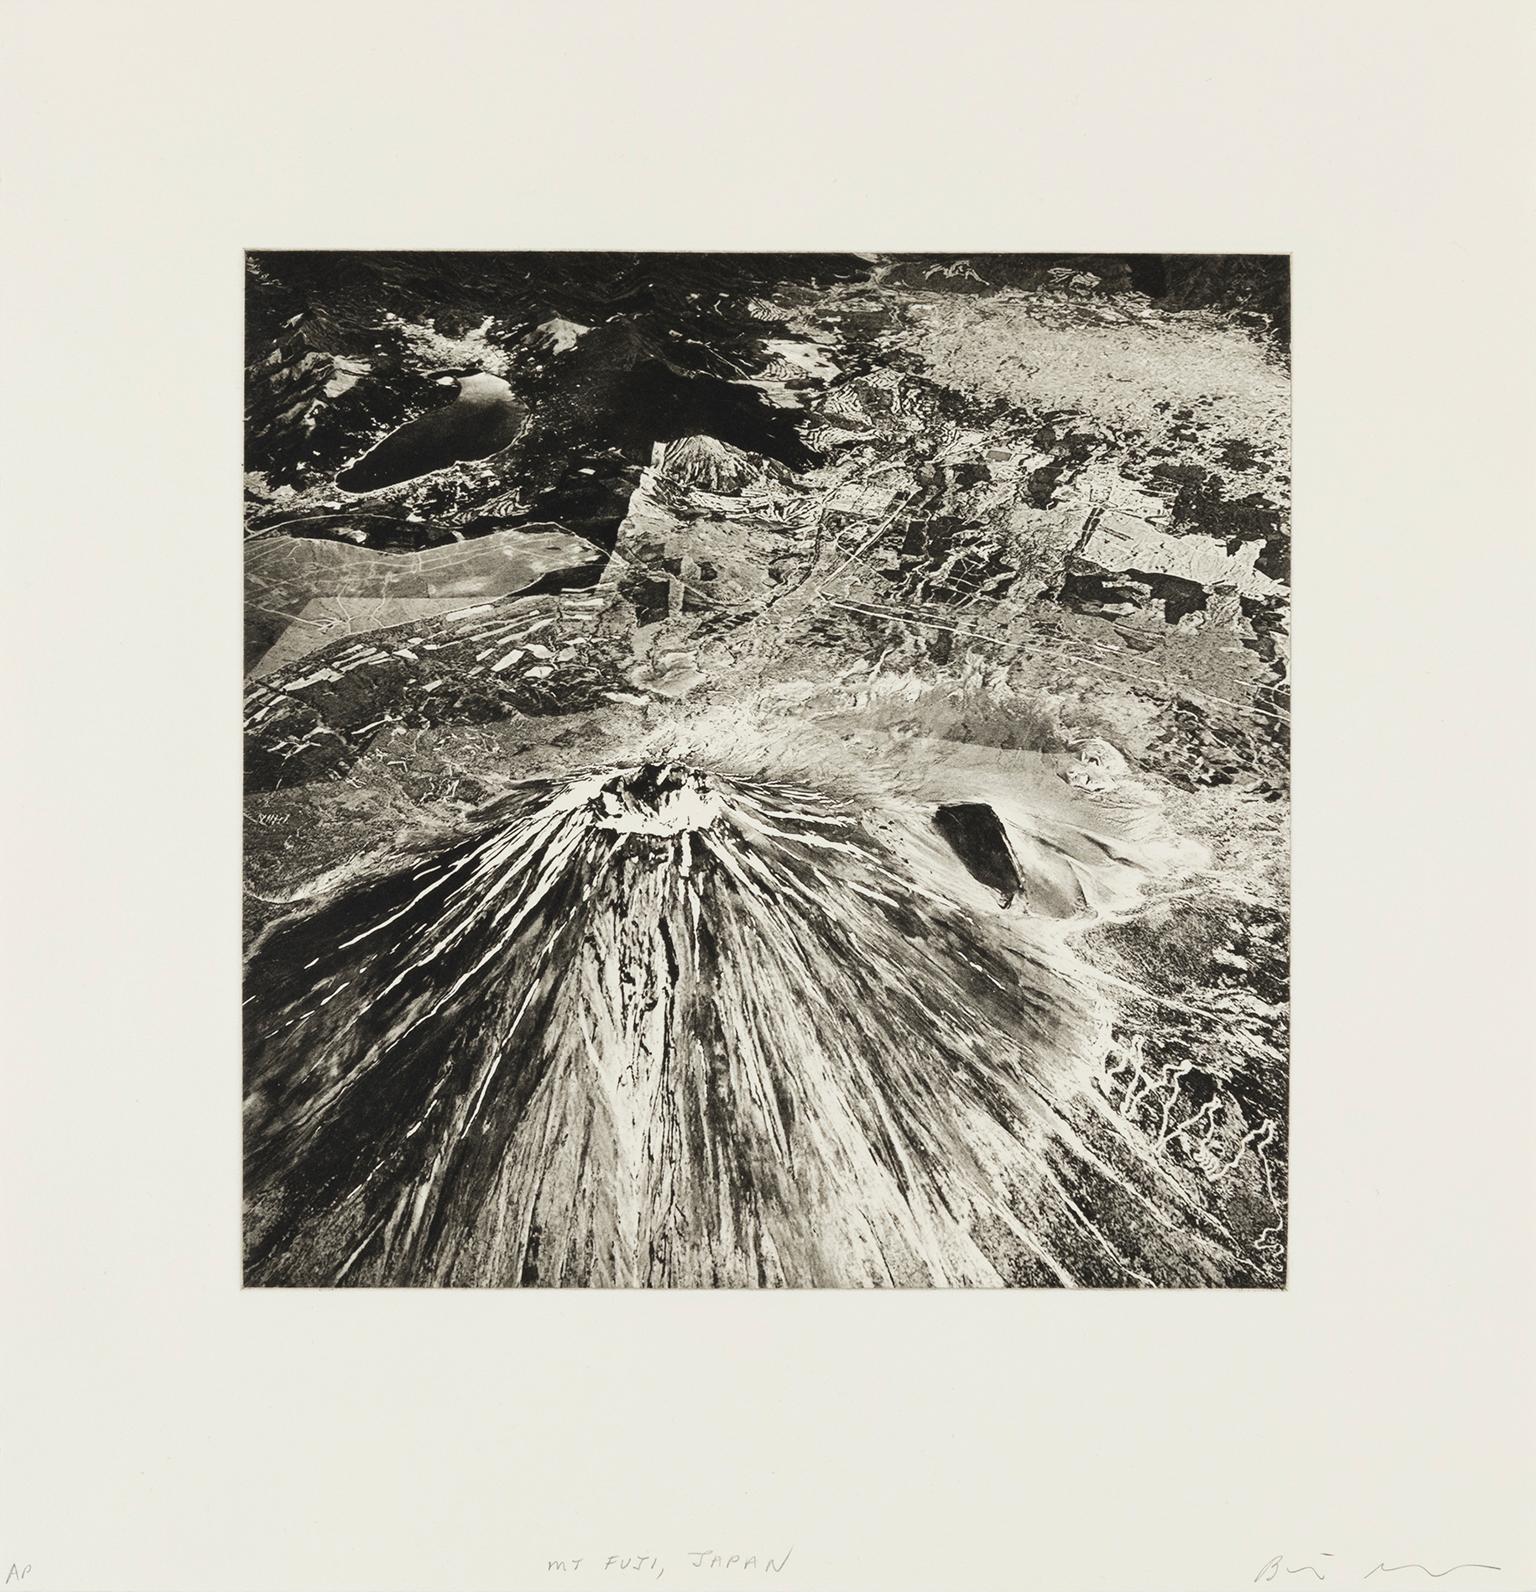 Beth Ganz Landscape Print - 'Mount Fuji, Japan' — from the series 'Axis Mundi', Contemporary